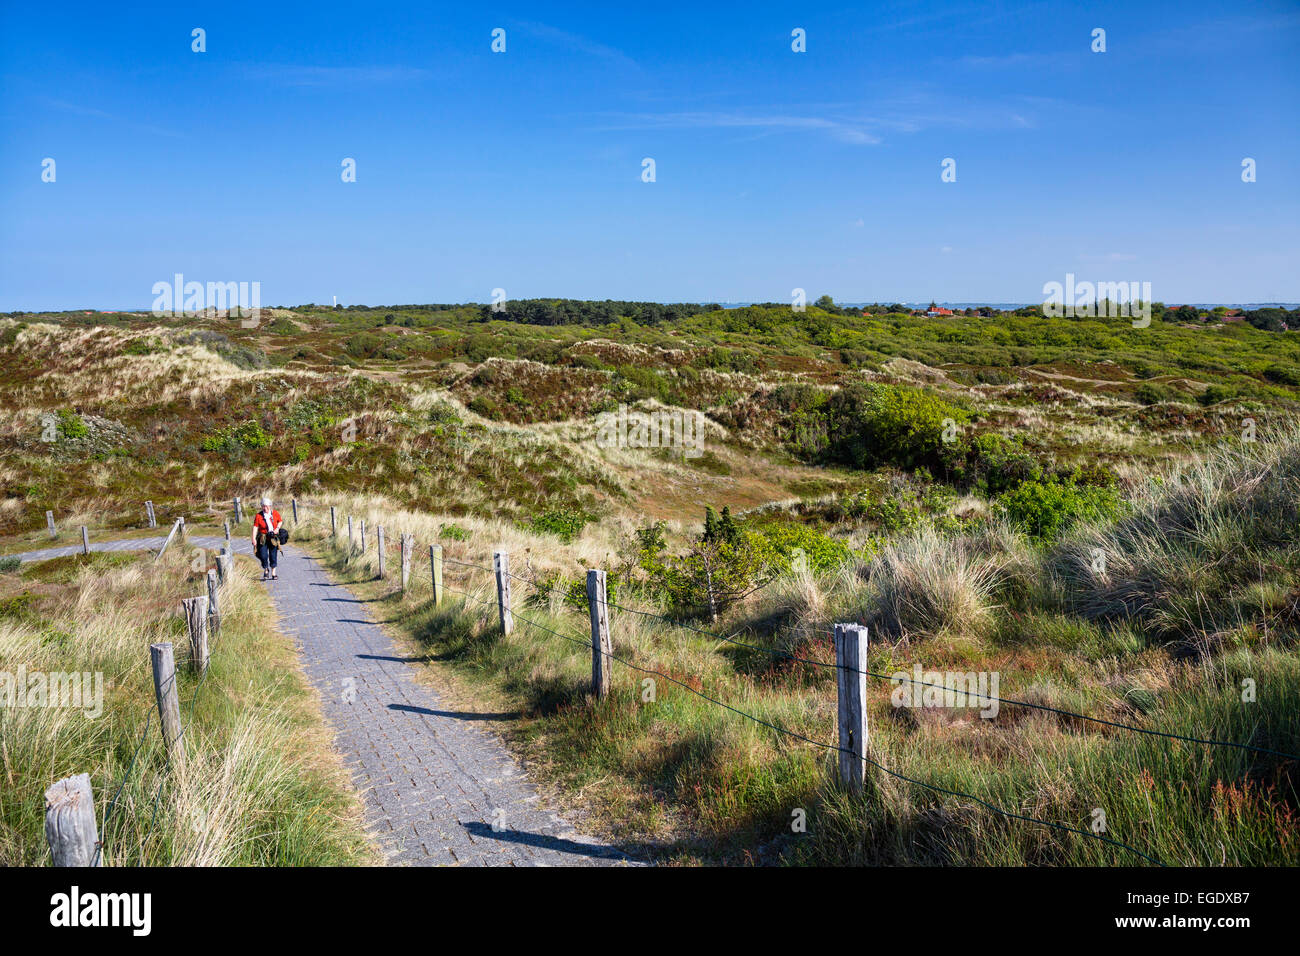 Trail in the dunes, Spiekeroog Island, National Park, North Sea, East Frisian Islands, East Frisia, Lower Saxony, Germany, Europe Stock Photo